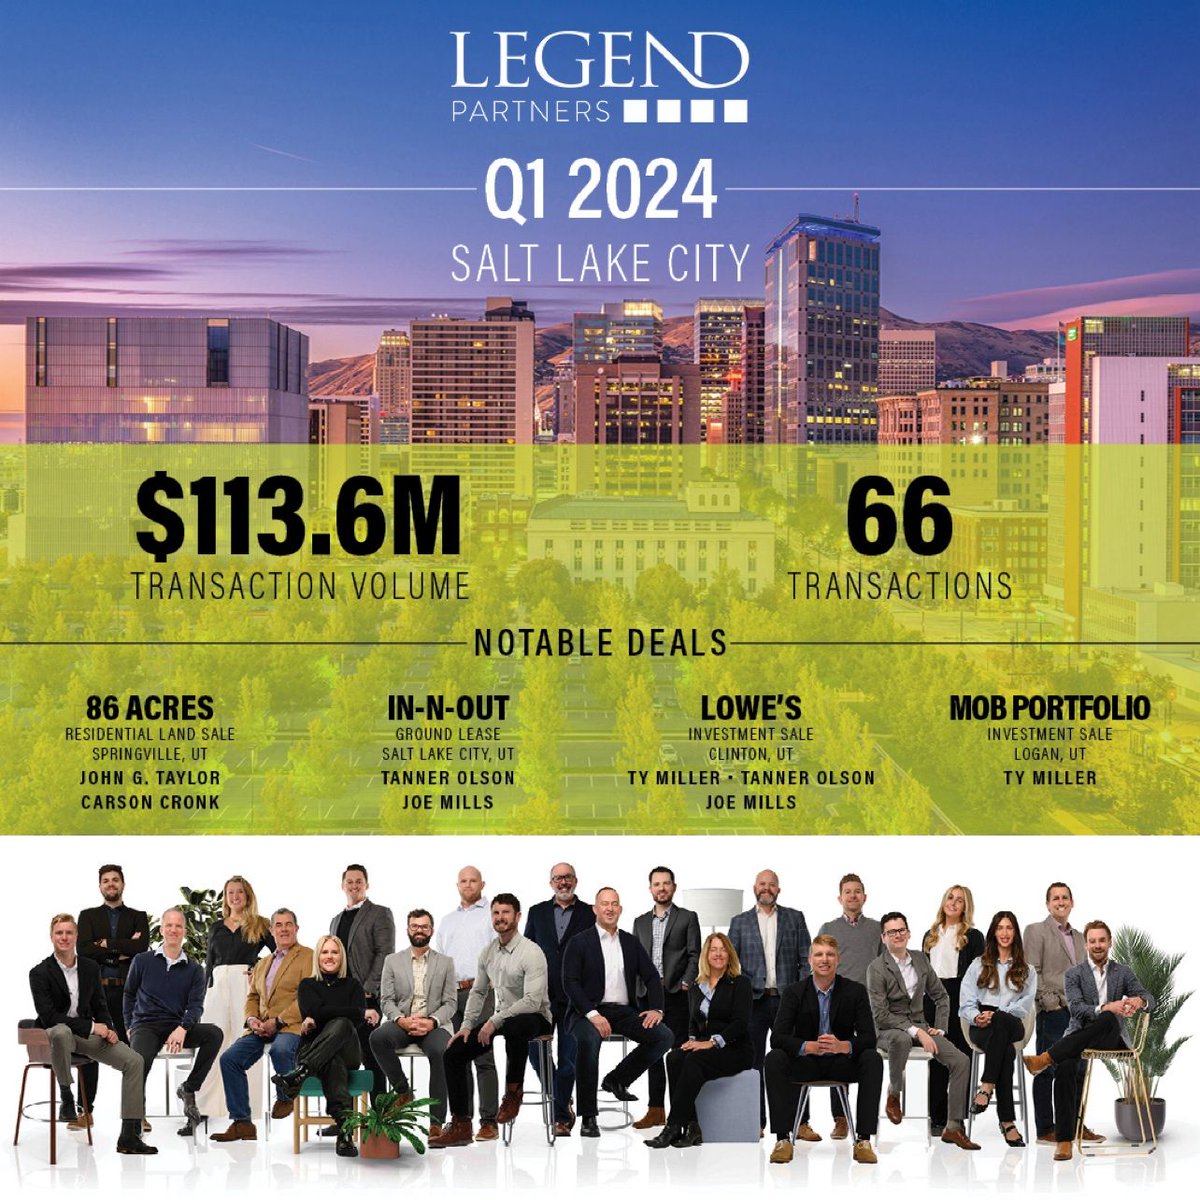 Great start to the year here at Legend Partners. This educated, hard working team is able to move and close deals in a stagnant market and I'm very grateful to be a part of it. @LegendLLP @CRE_Legends @NNNIncome @chloecypers @Tesslamotor @TyMiller_CRE